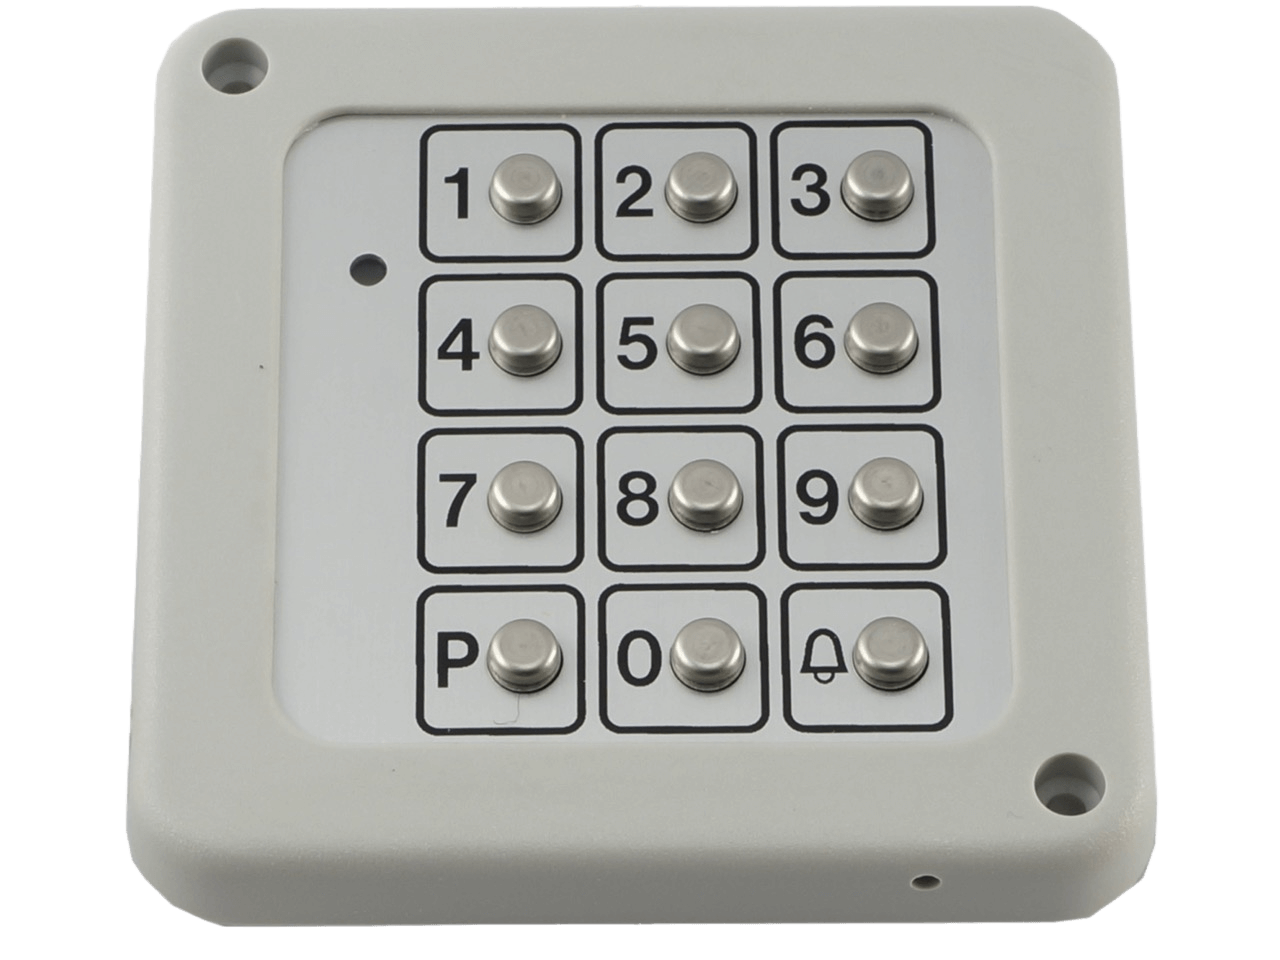 Orion OCL 1 AP V and DCE 1 24V Code-Lock with Stainless Steel Keypad